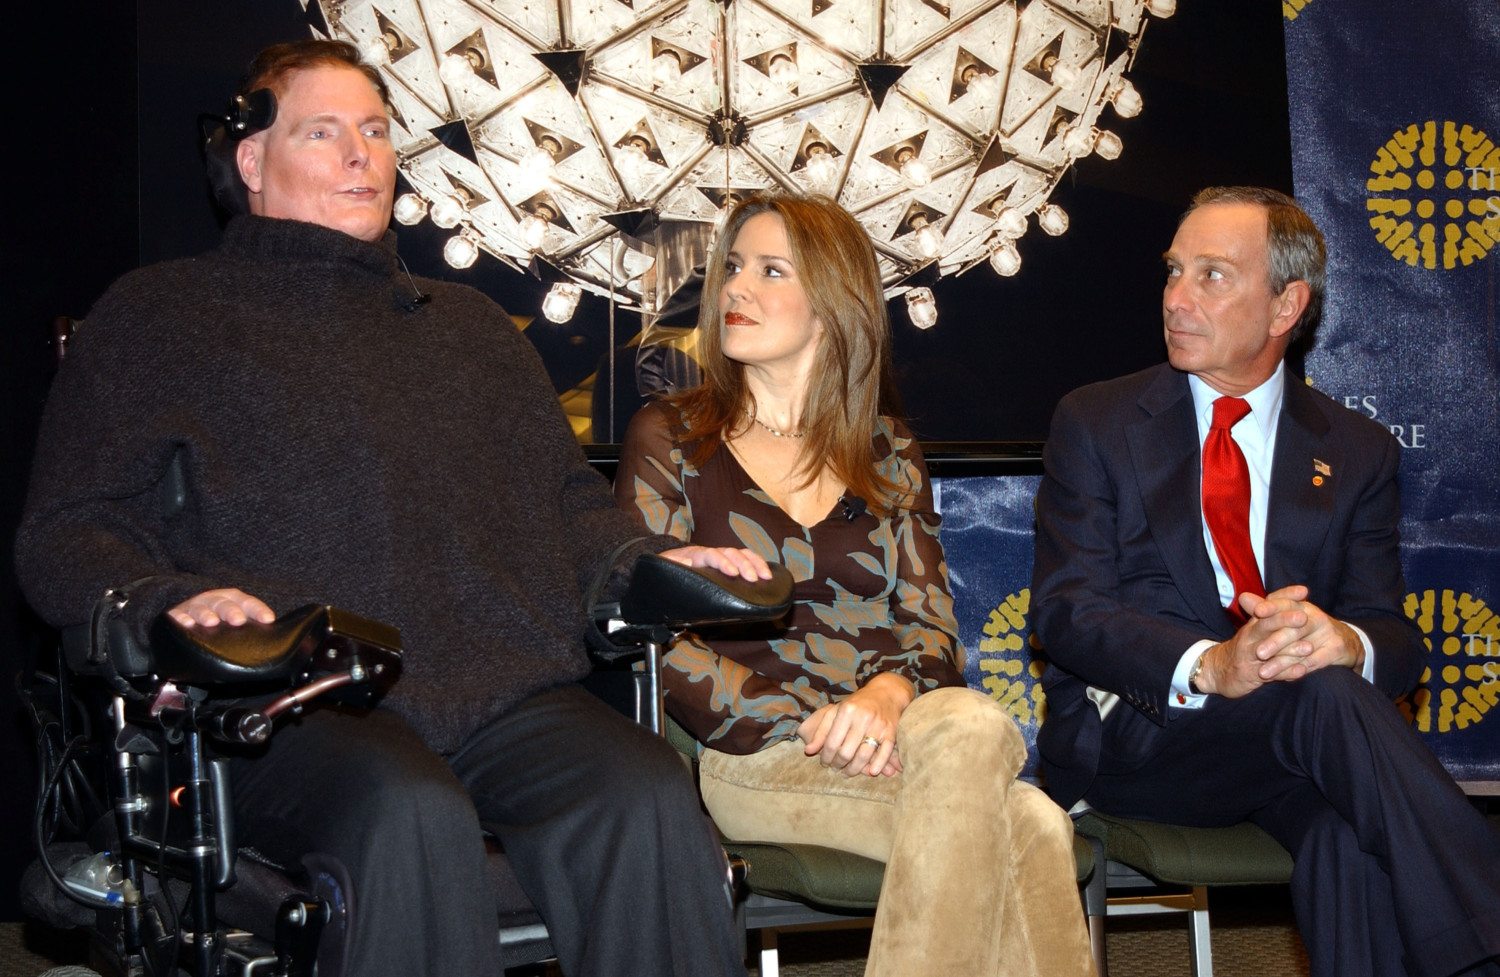 Christopher Reeve times square ball drop photo